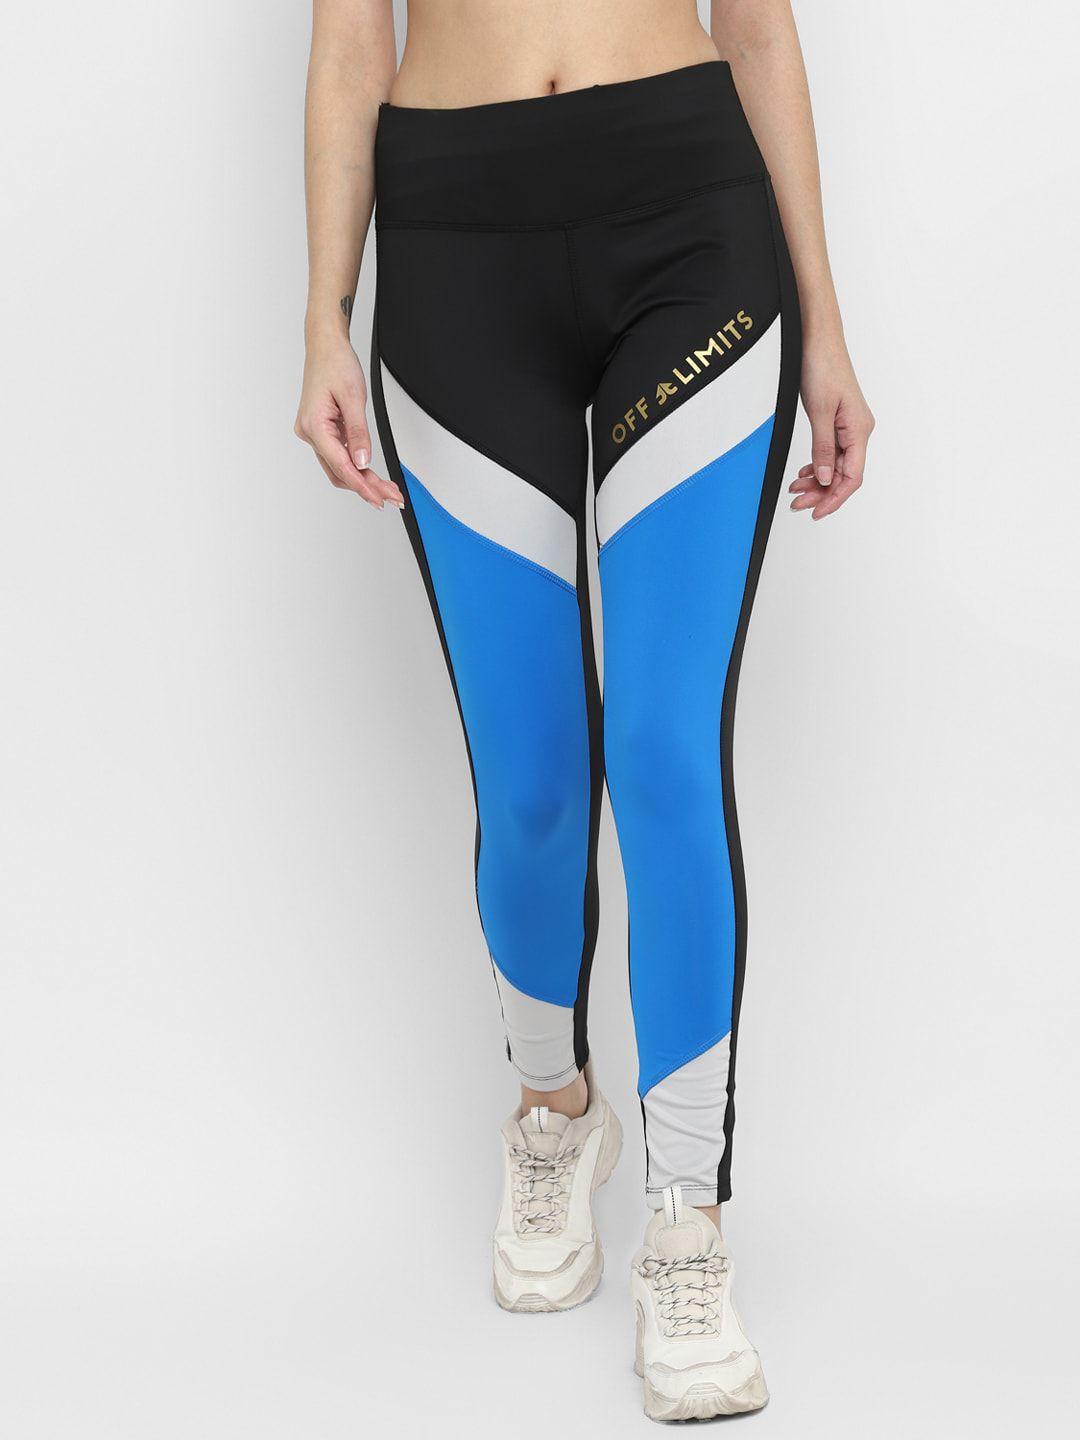 off-limits-women-black-&-blue-colourblocked-workout-tights